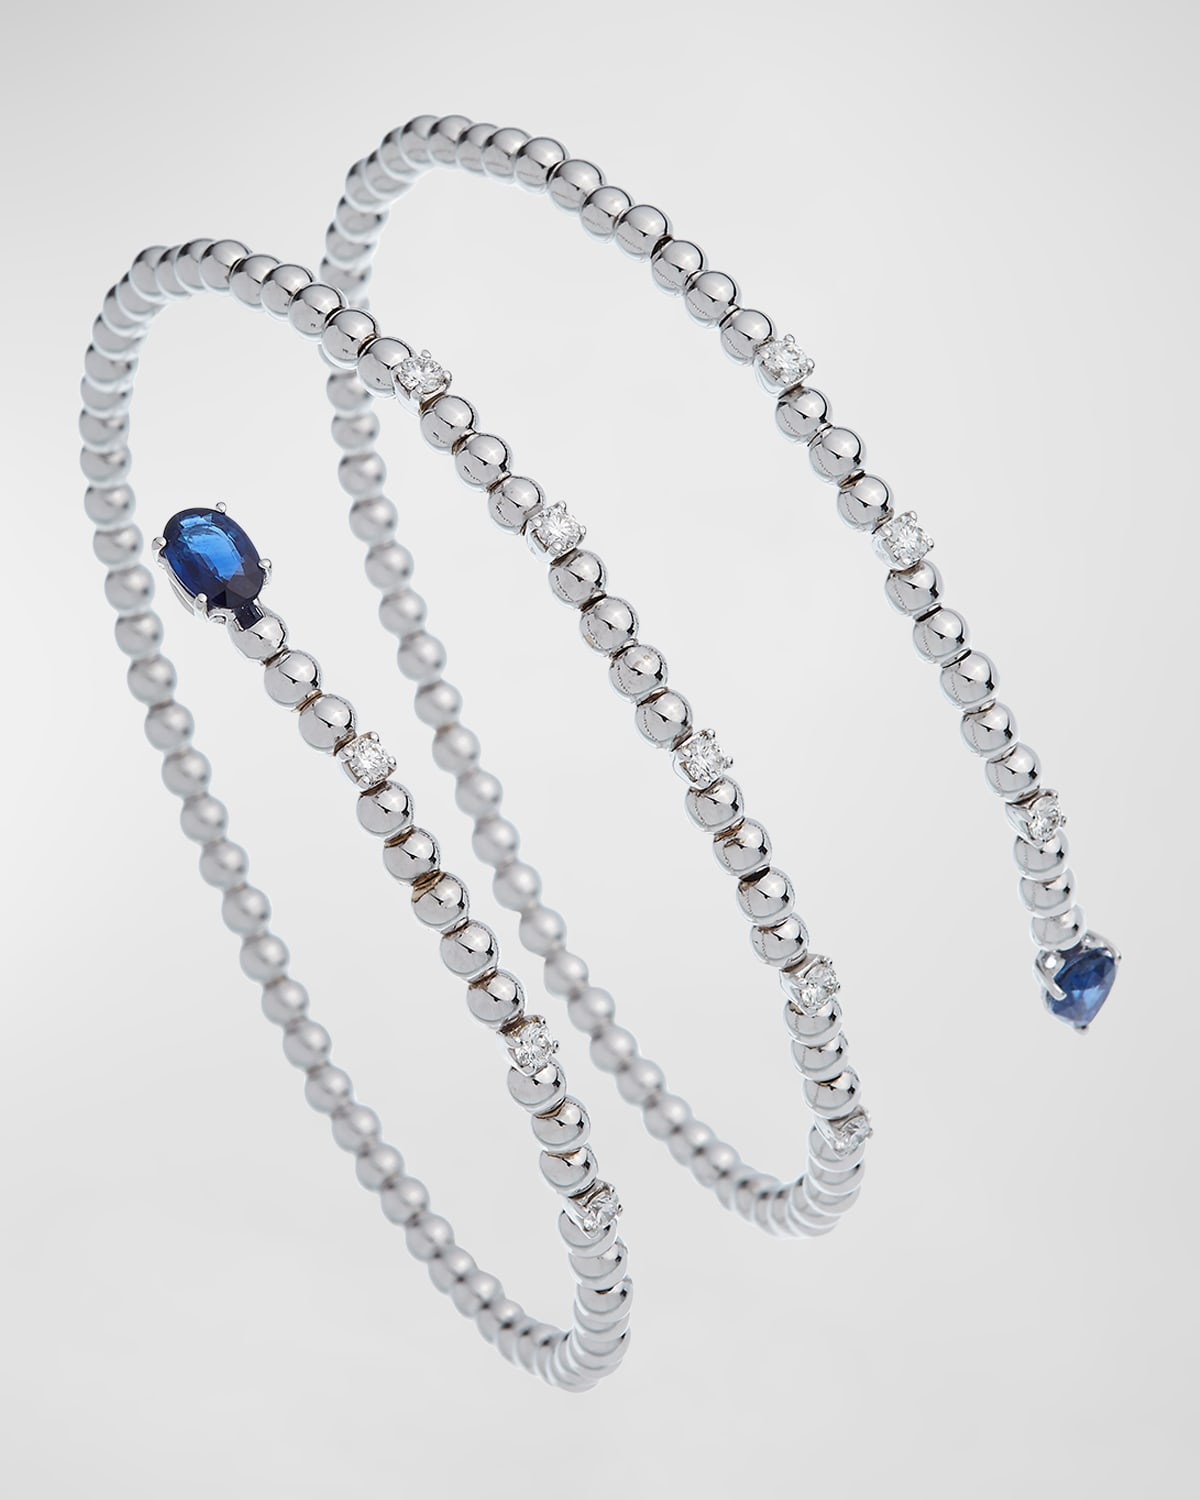 Krisonia 18k White Gold Bracelet With Diamonds And Blue Sapphires In Metallic